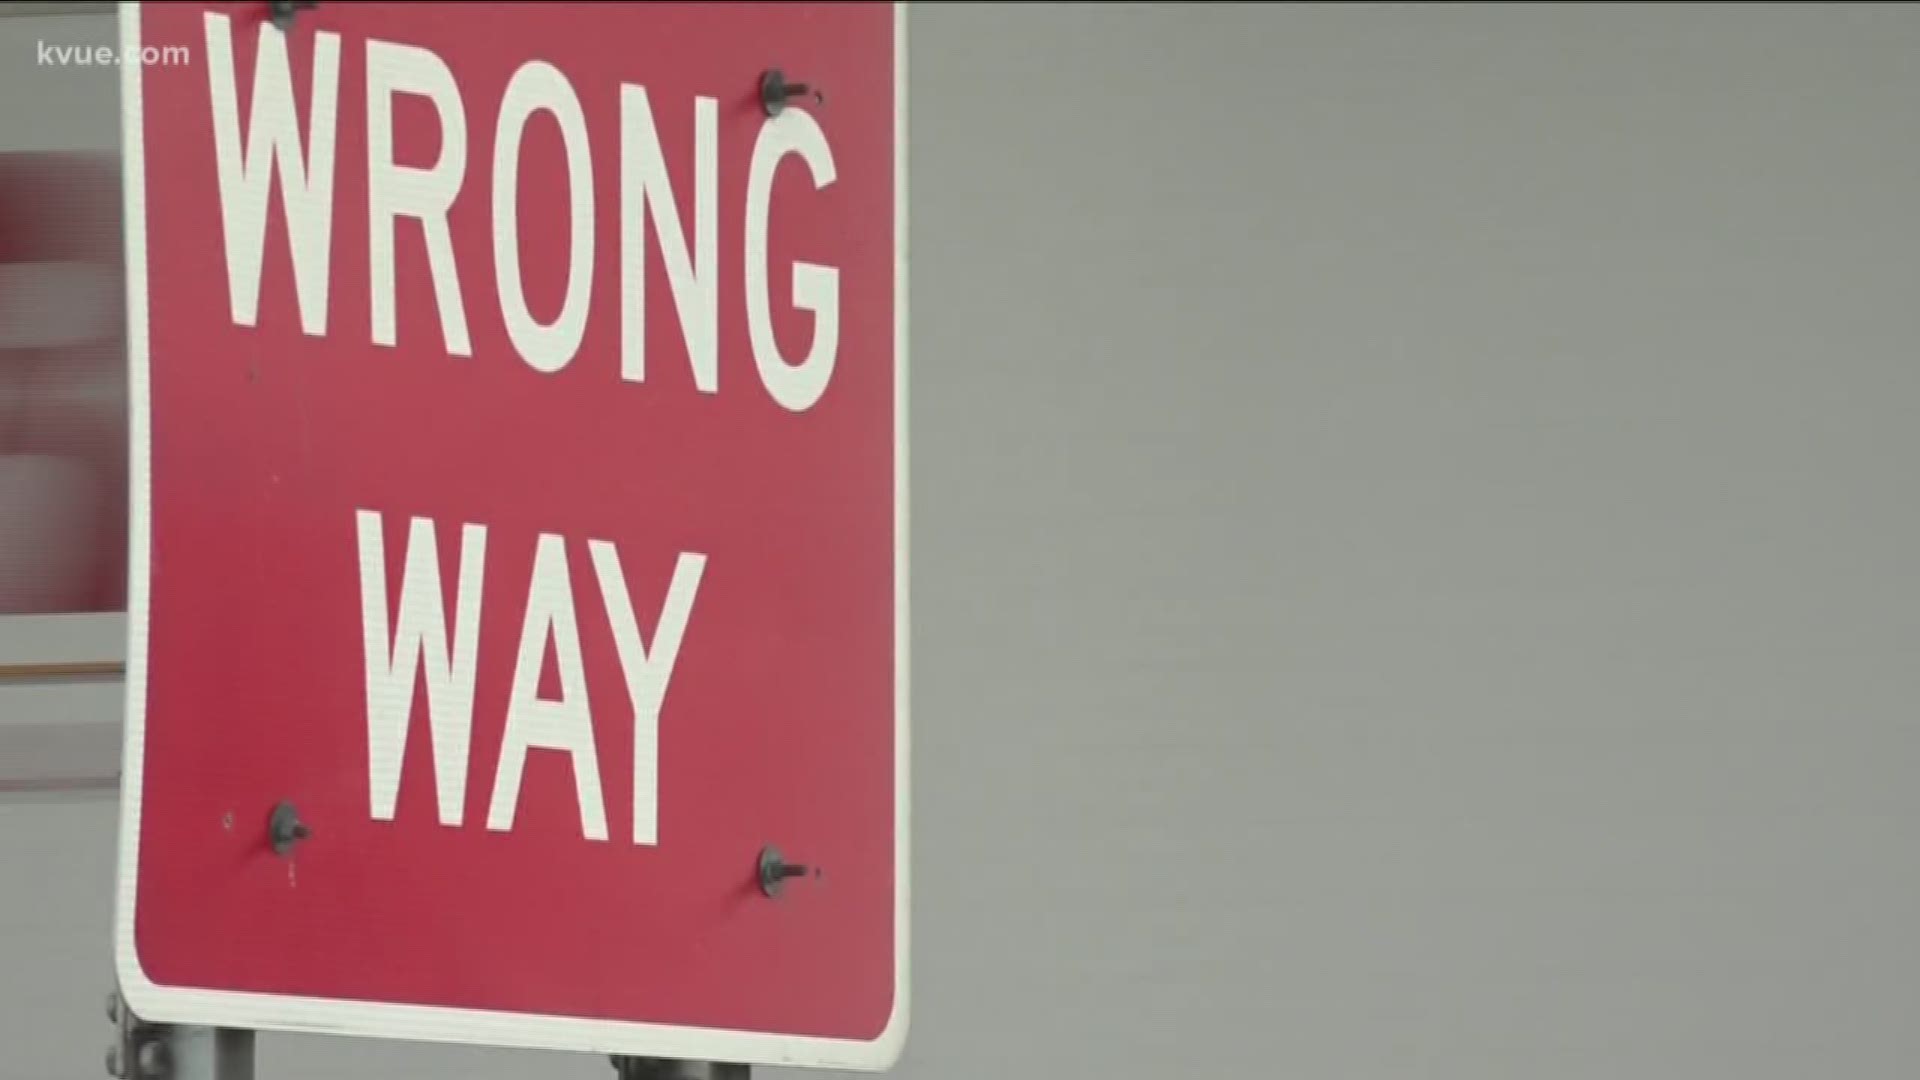 For years -- Texas has led the nation in wrong-way crashes.